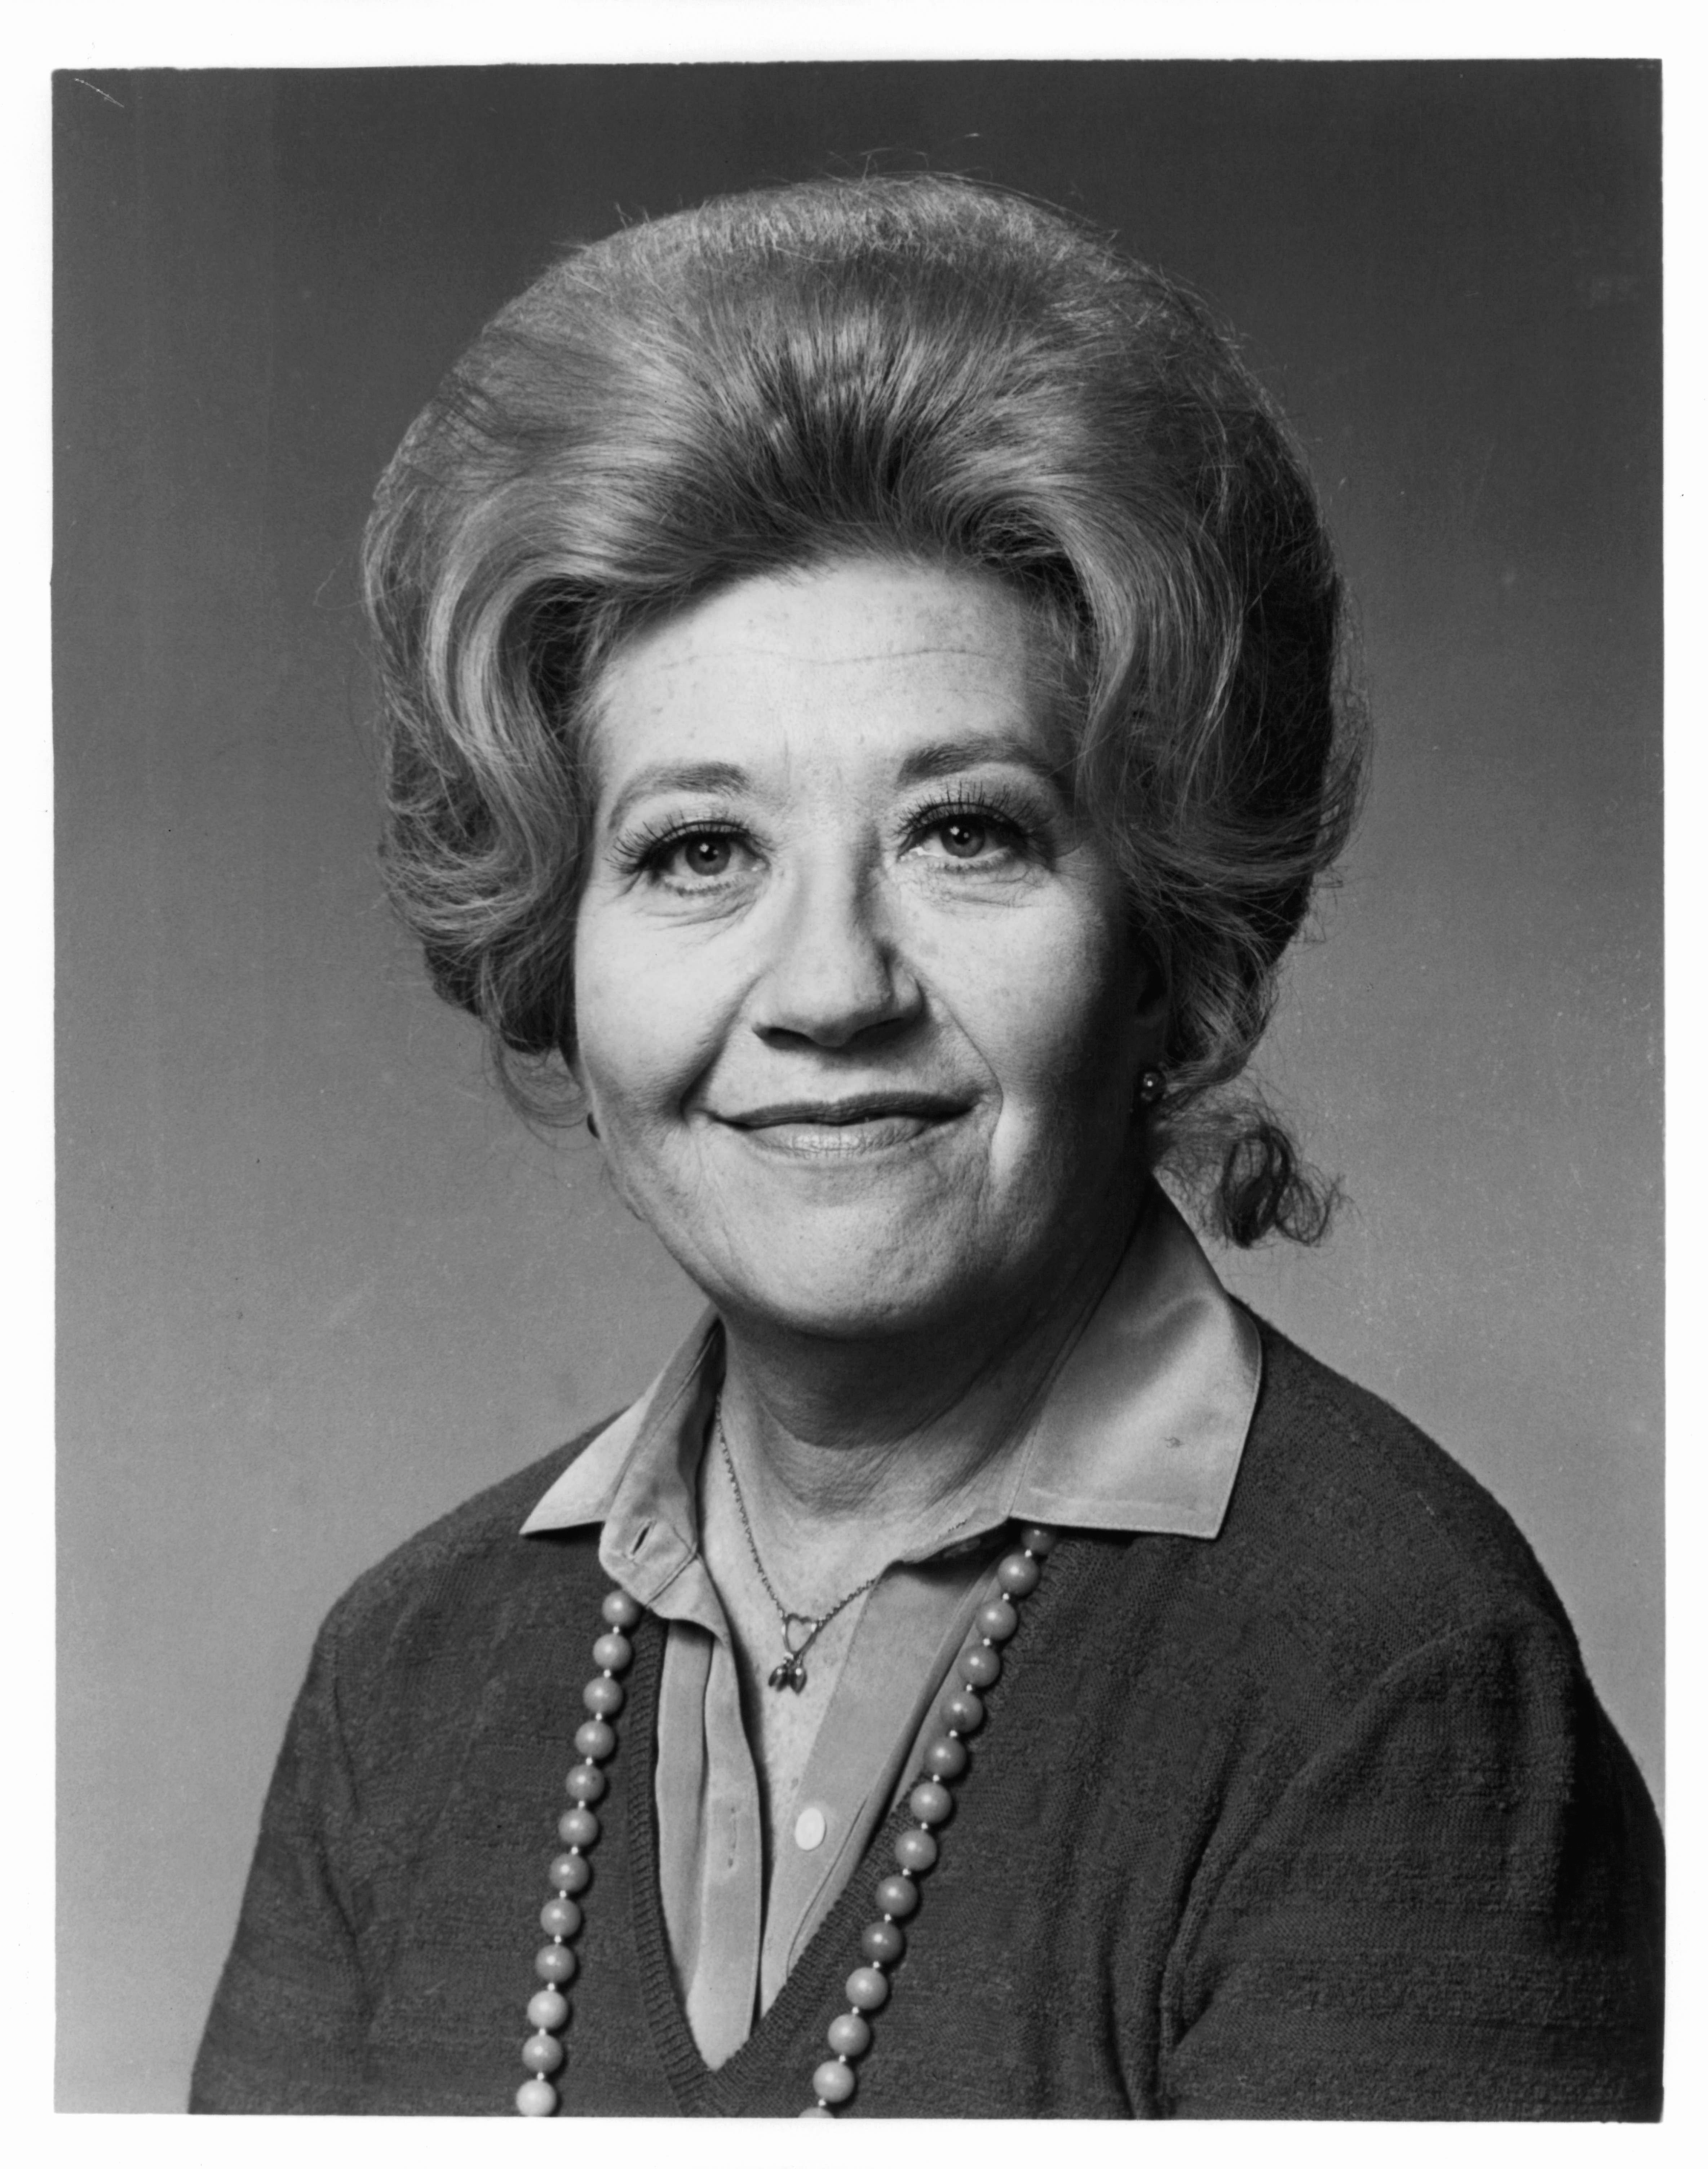 Charlotte Rae in a portrait for the television series "The Facts Of Life," circa 1980. | Source: Getty Images